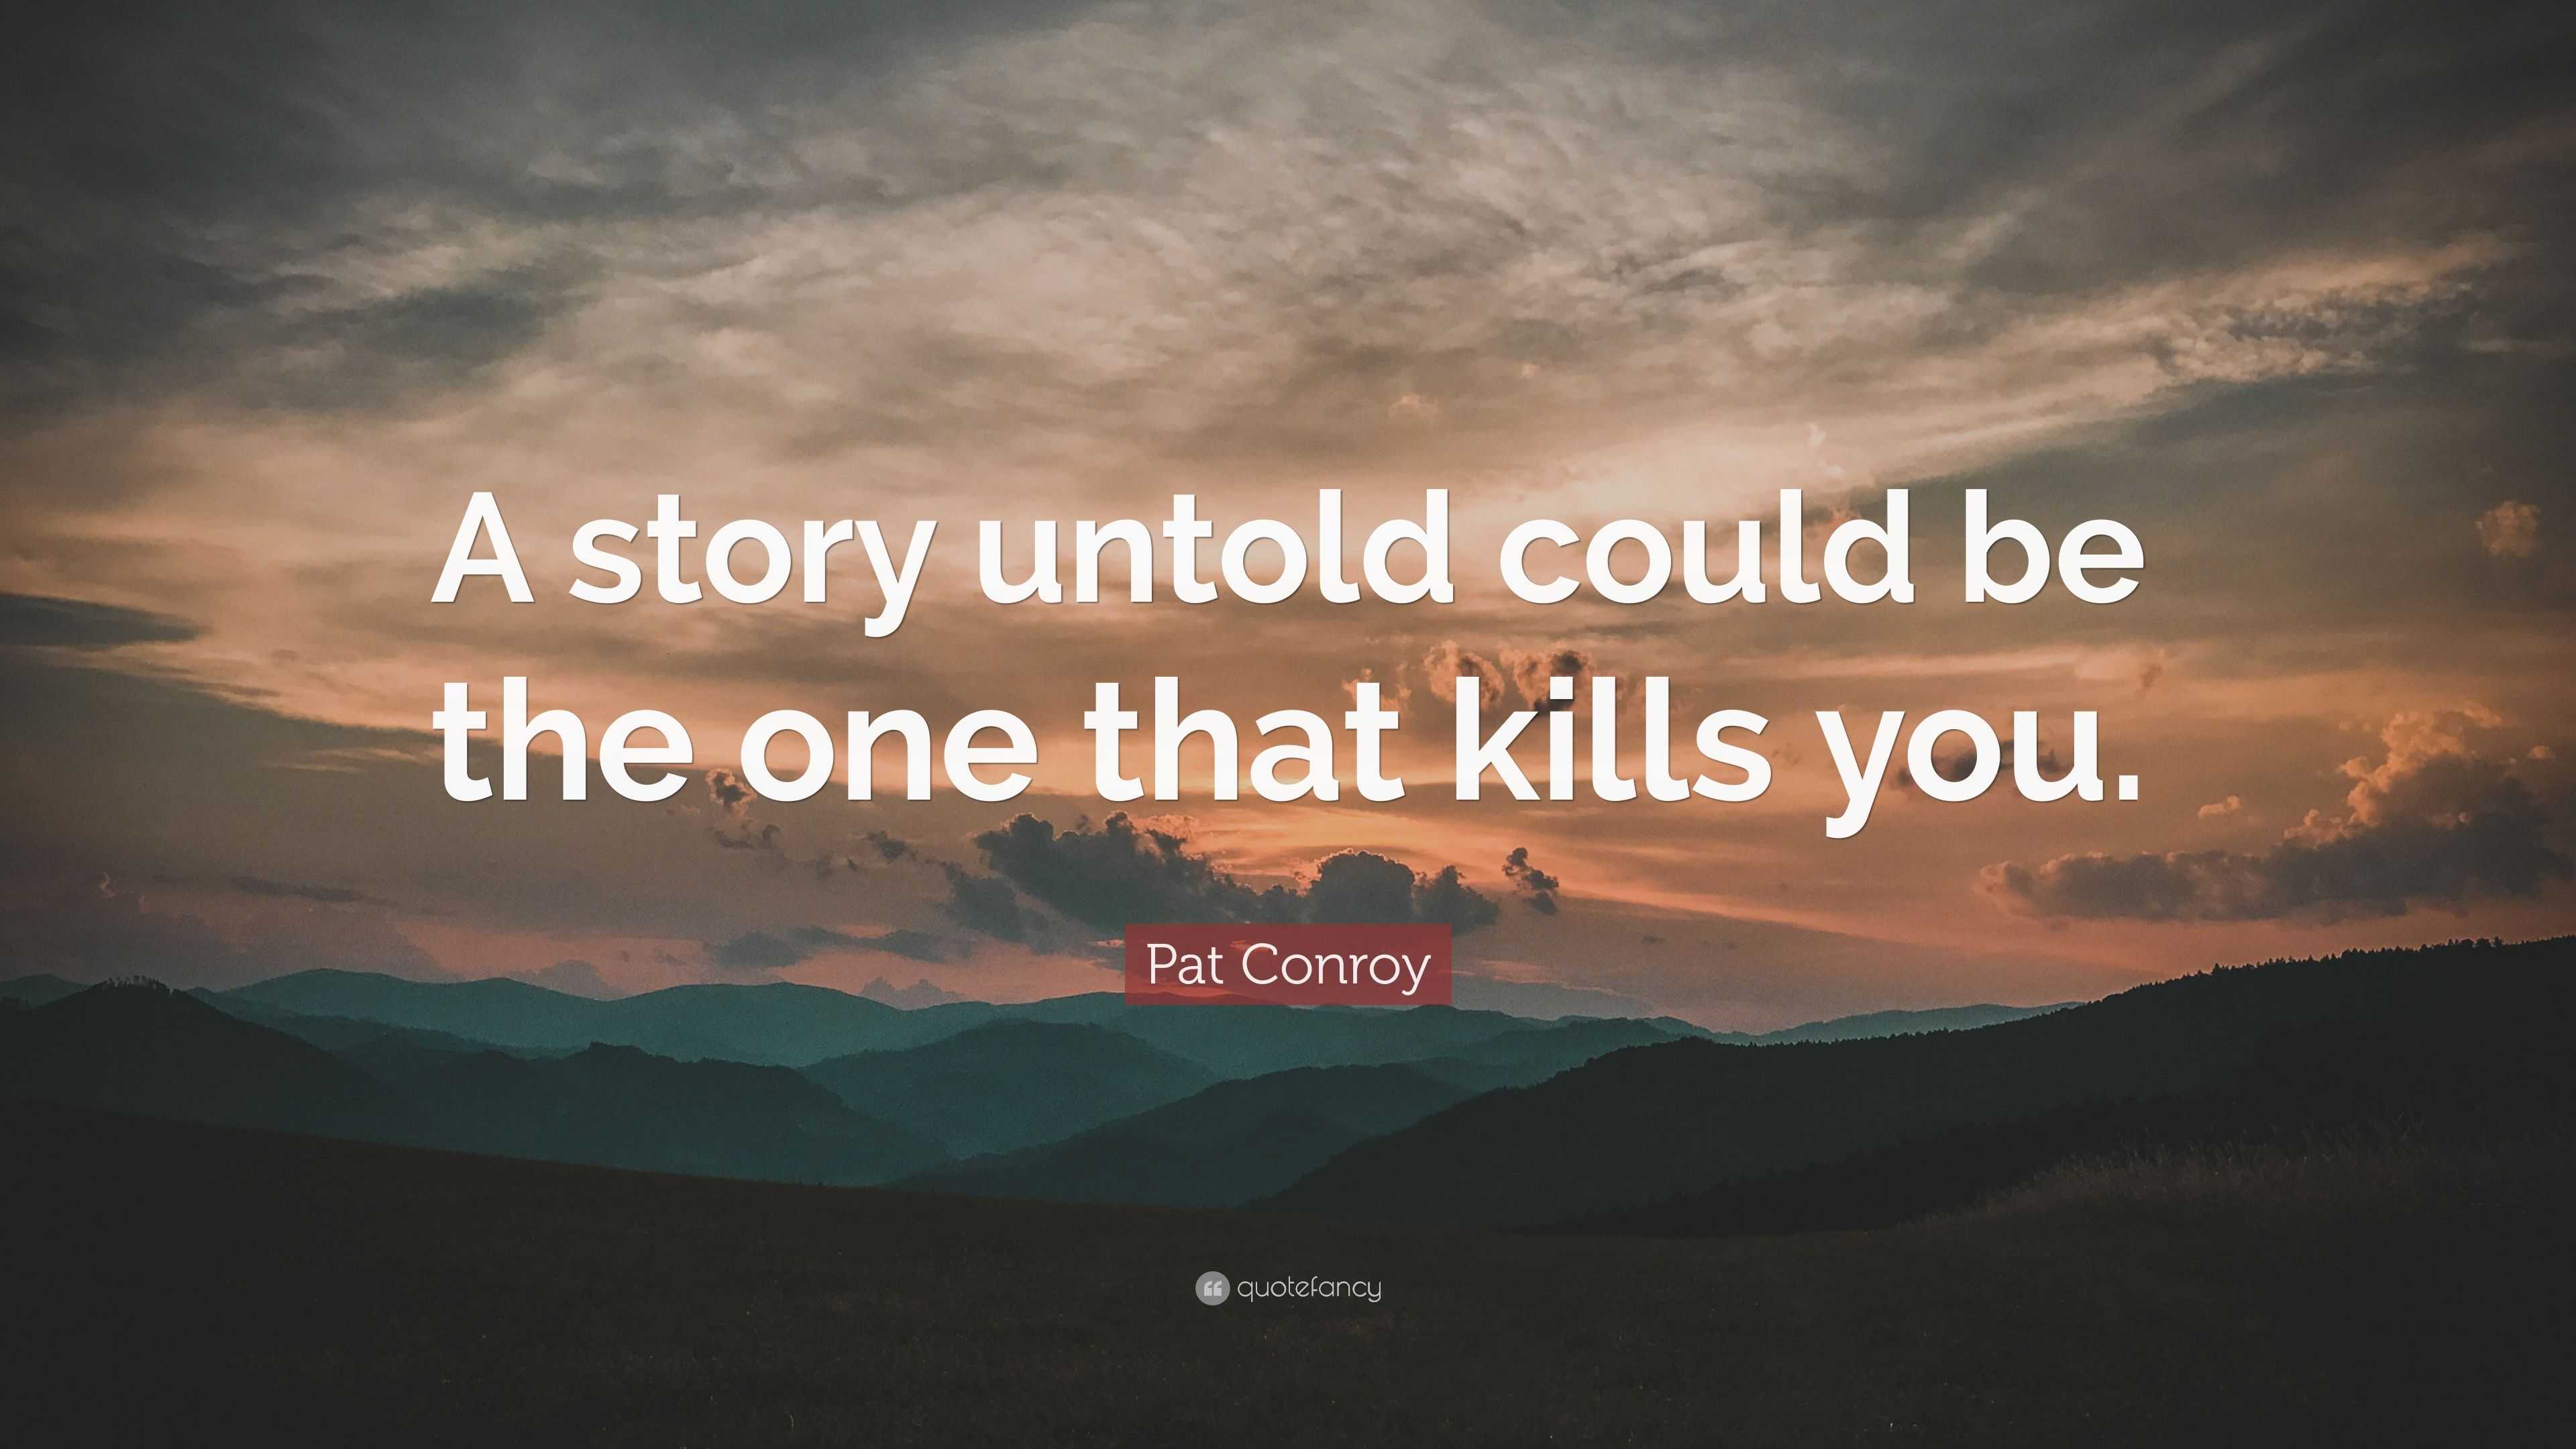 Pat Conroy Quote: “A story untold could be the one that kills you.”